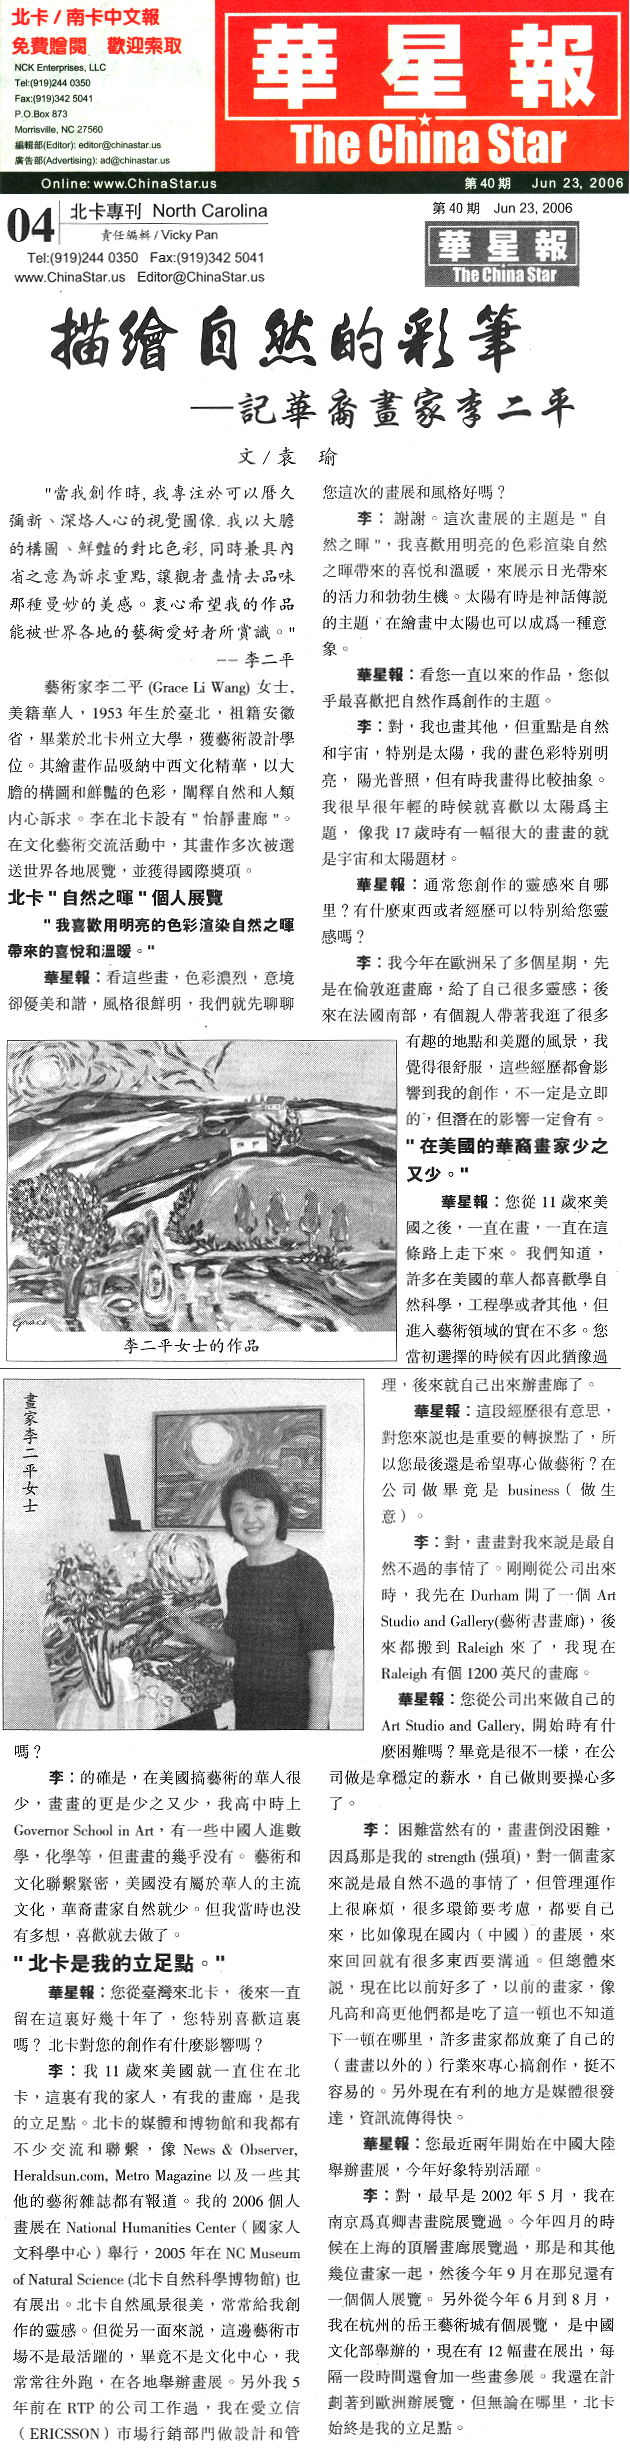 Article in the China Star